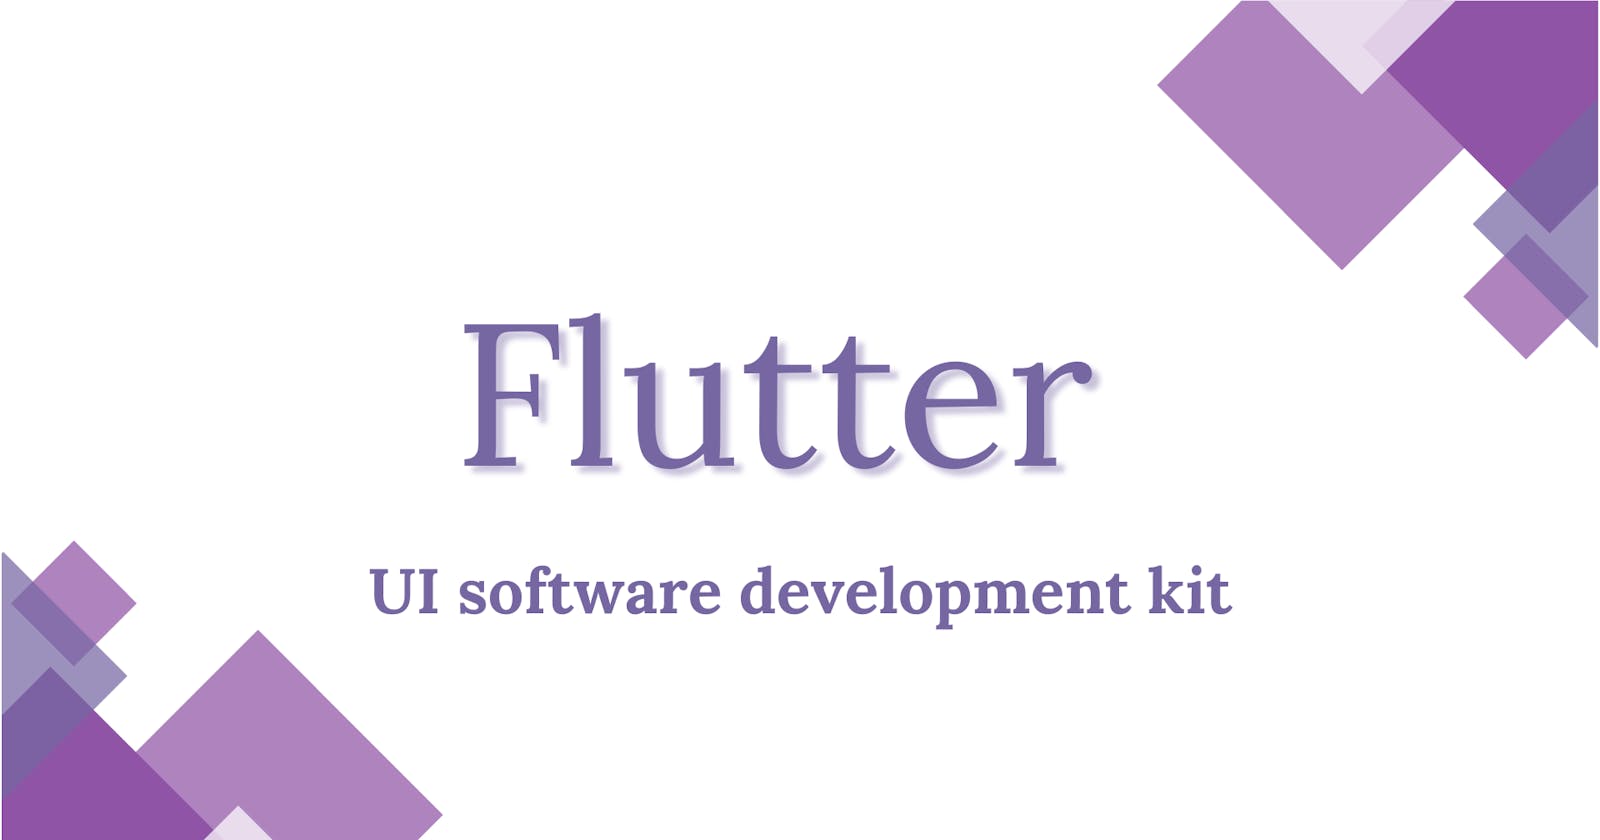 Getting started with Flutter